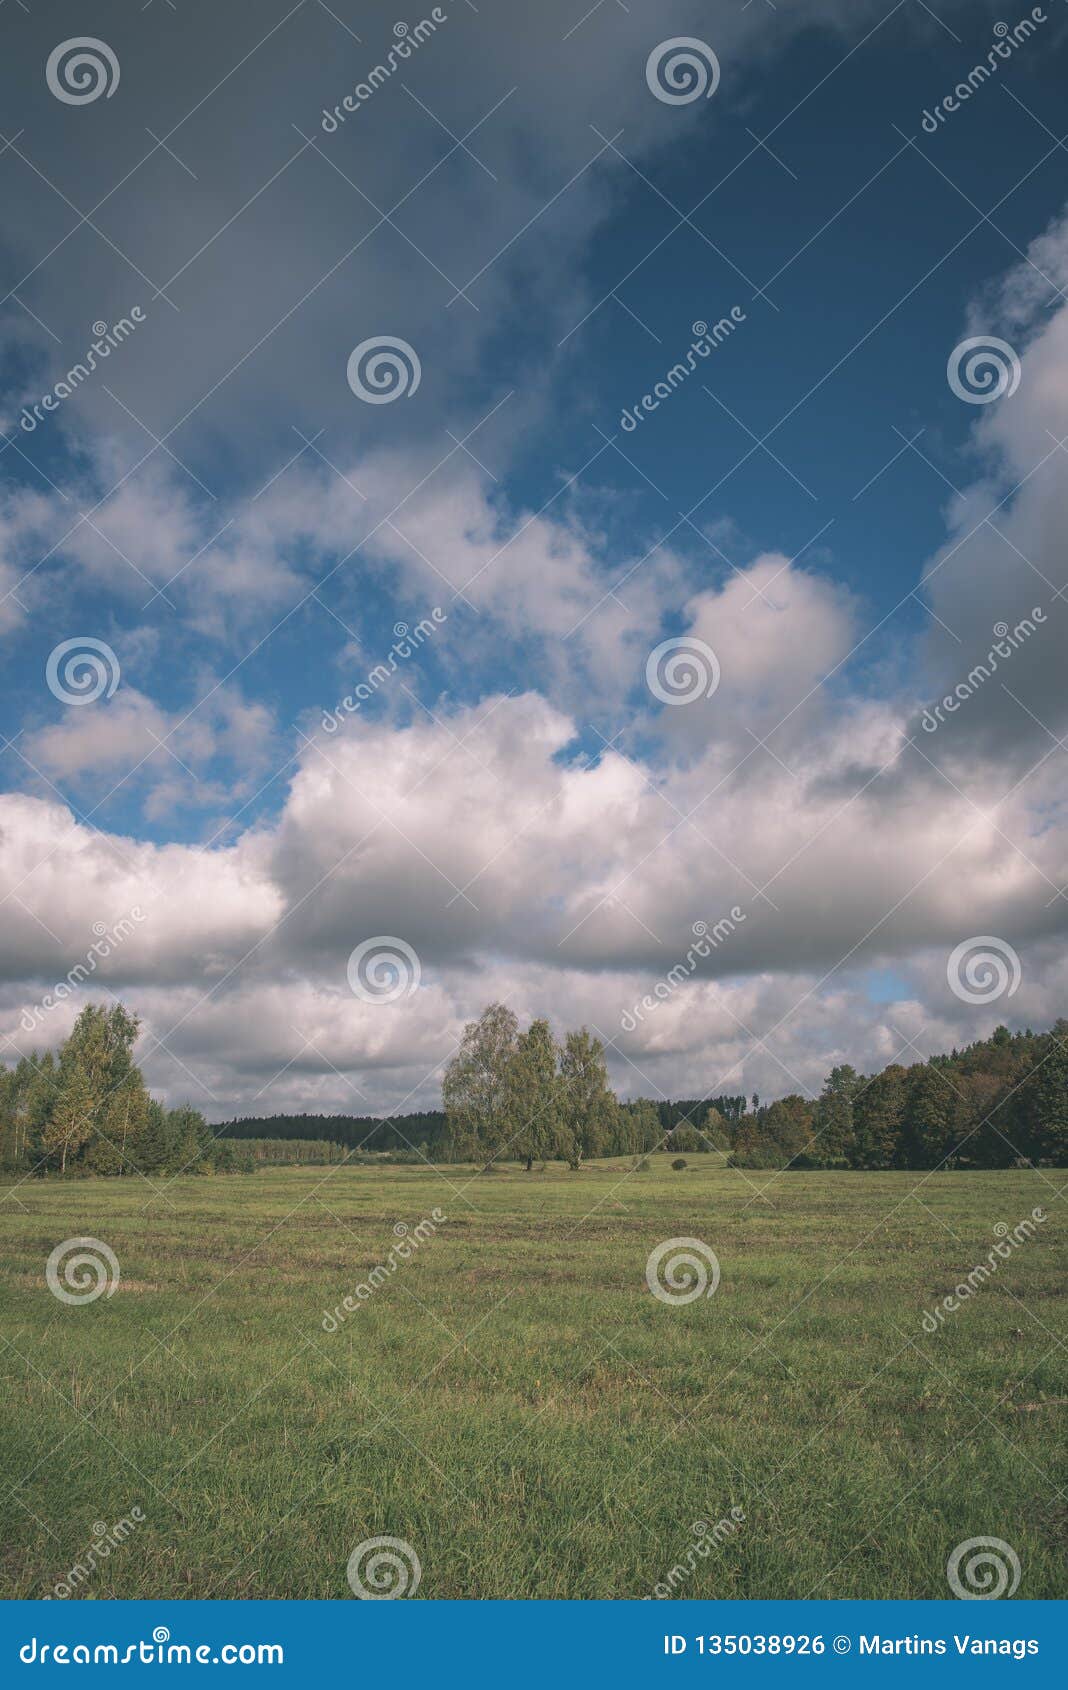 Cultivated Wheat Field in Summer - Vintage Retro Look Stock Photo ...